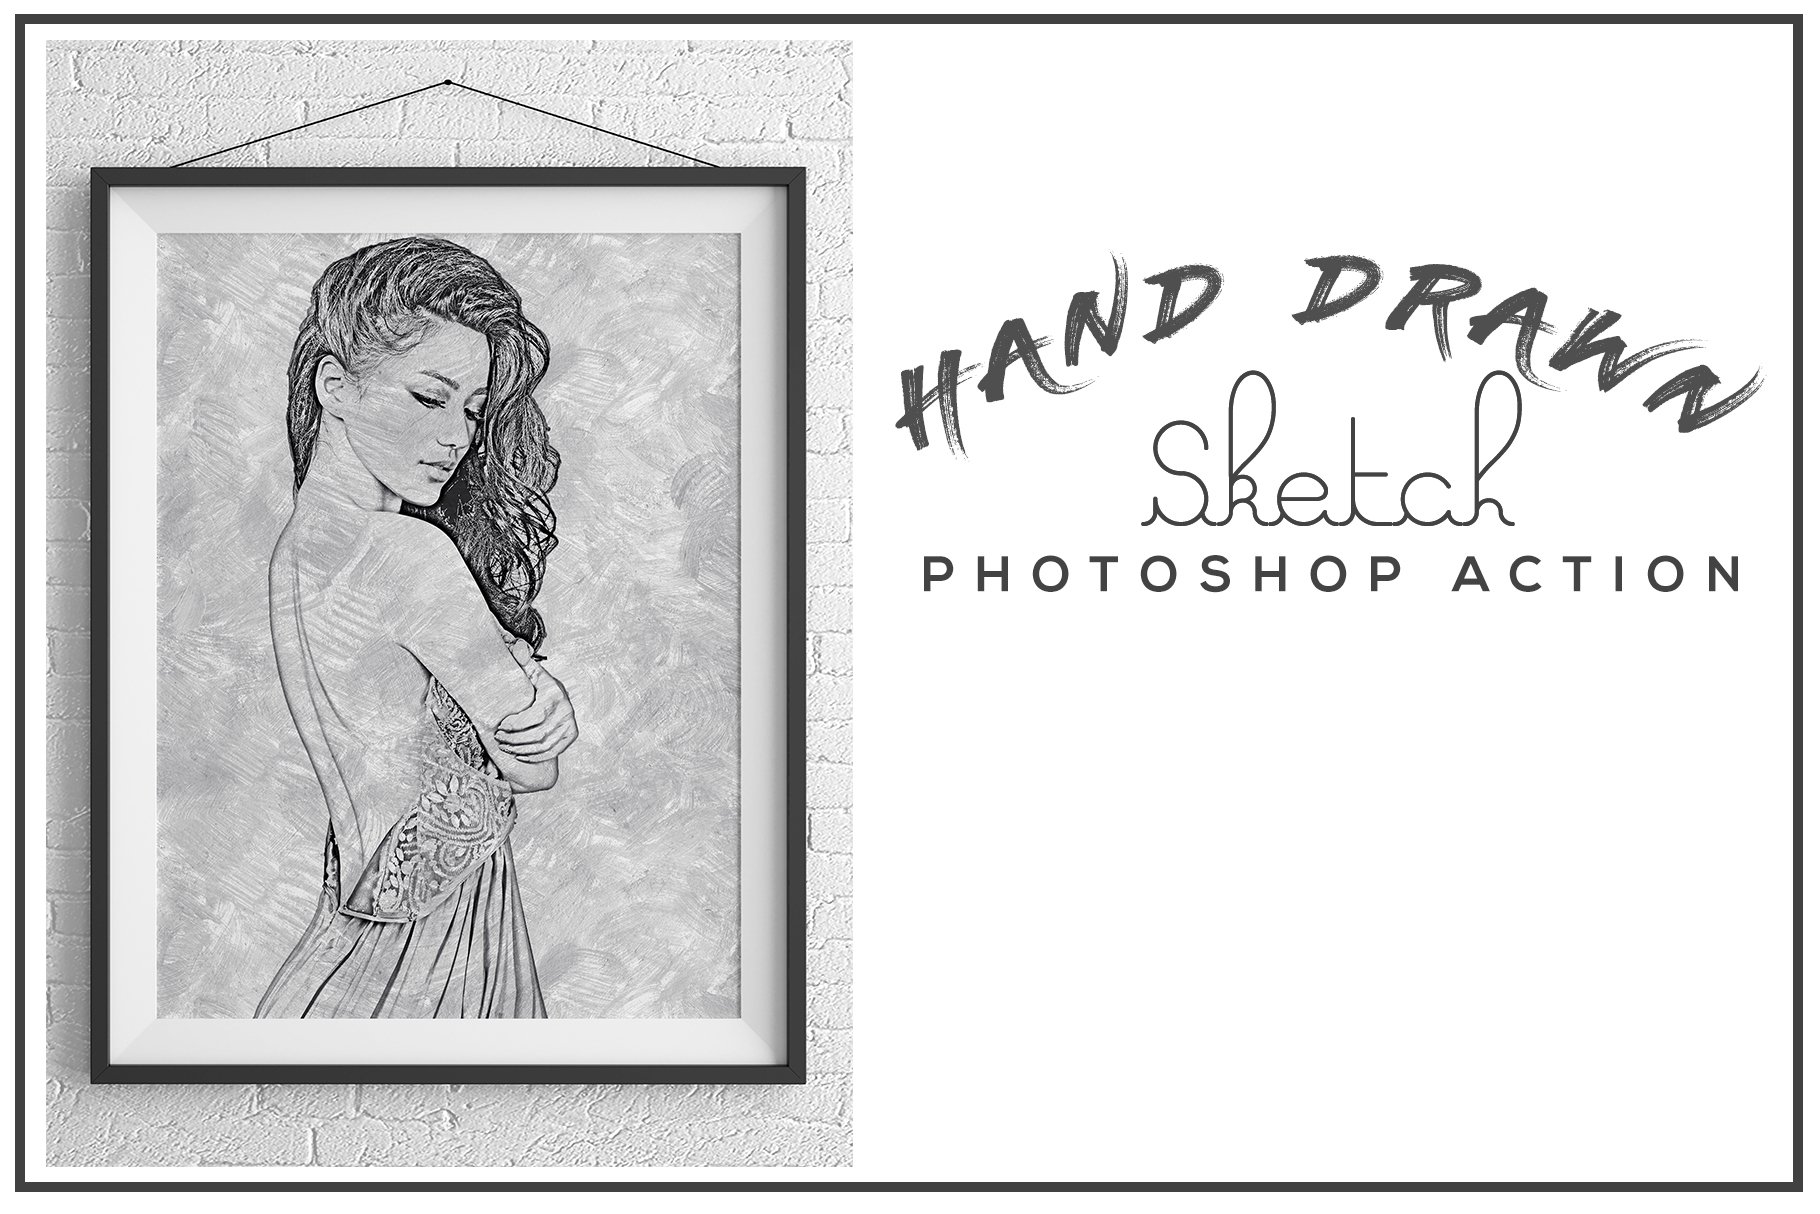 Hand Drawn Sketch Photoshop Actioncover image.